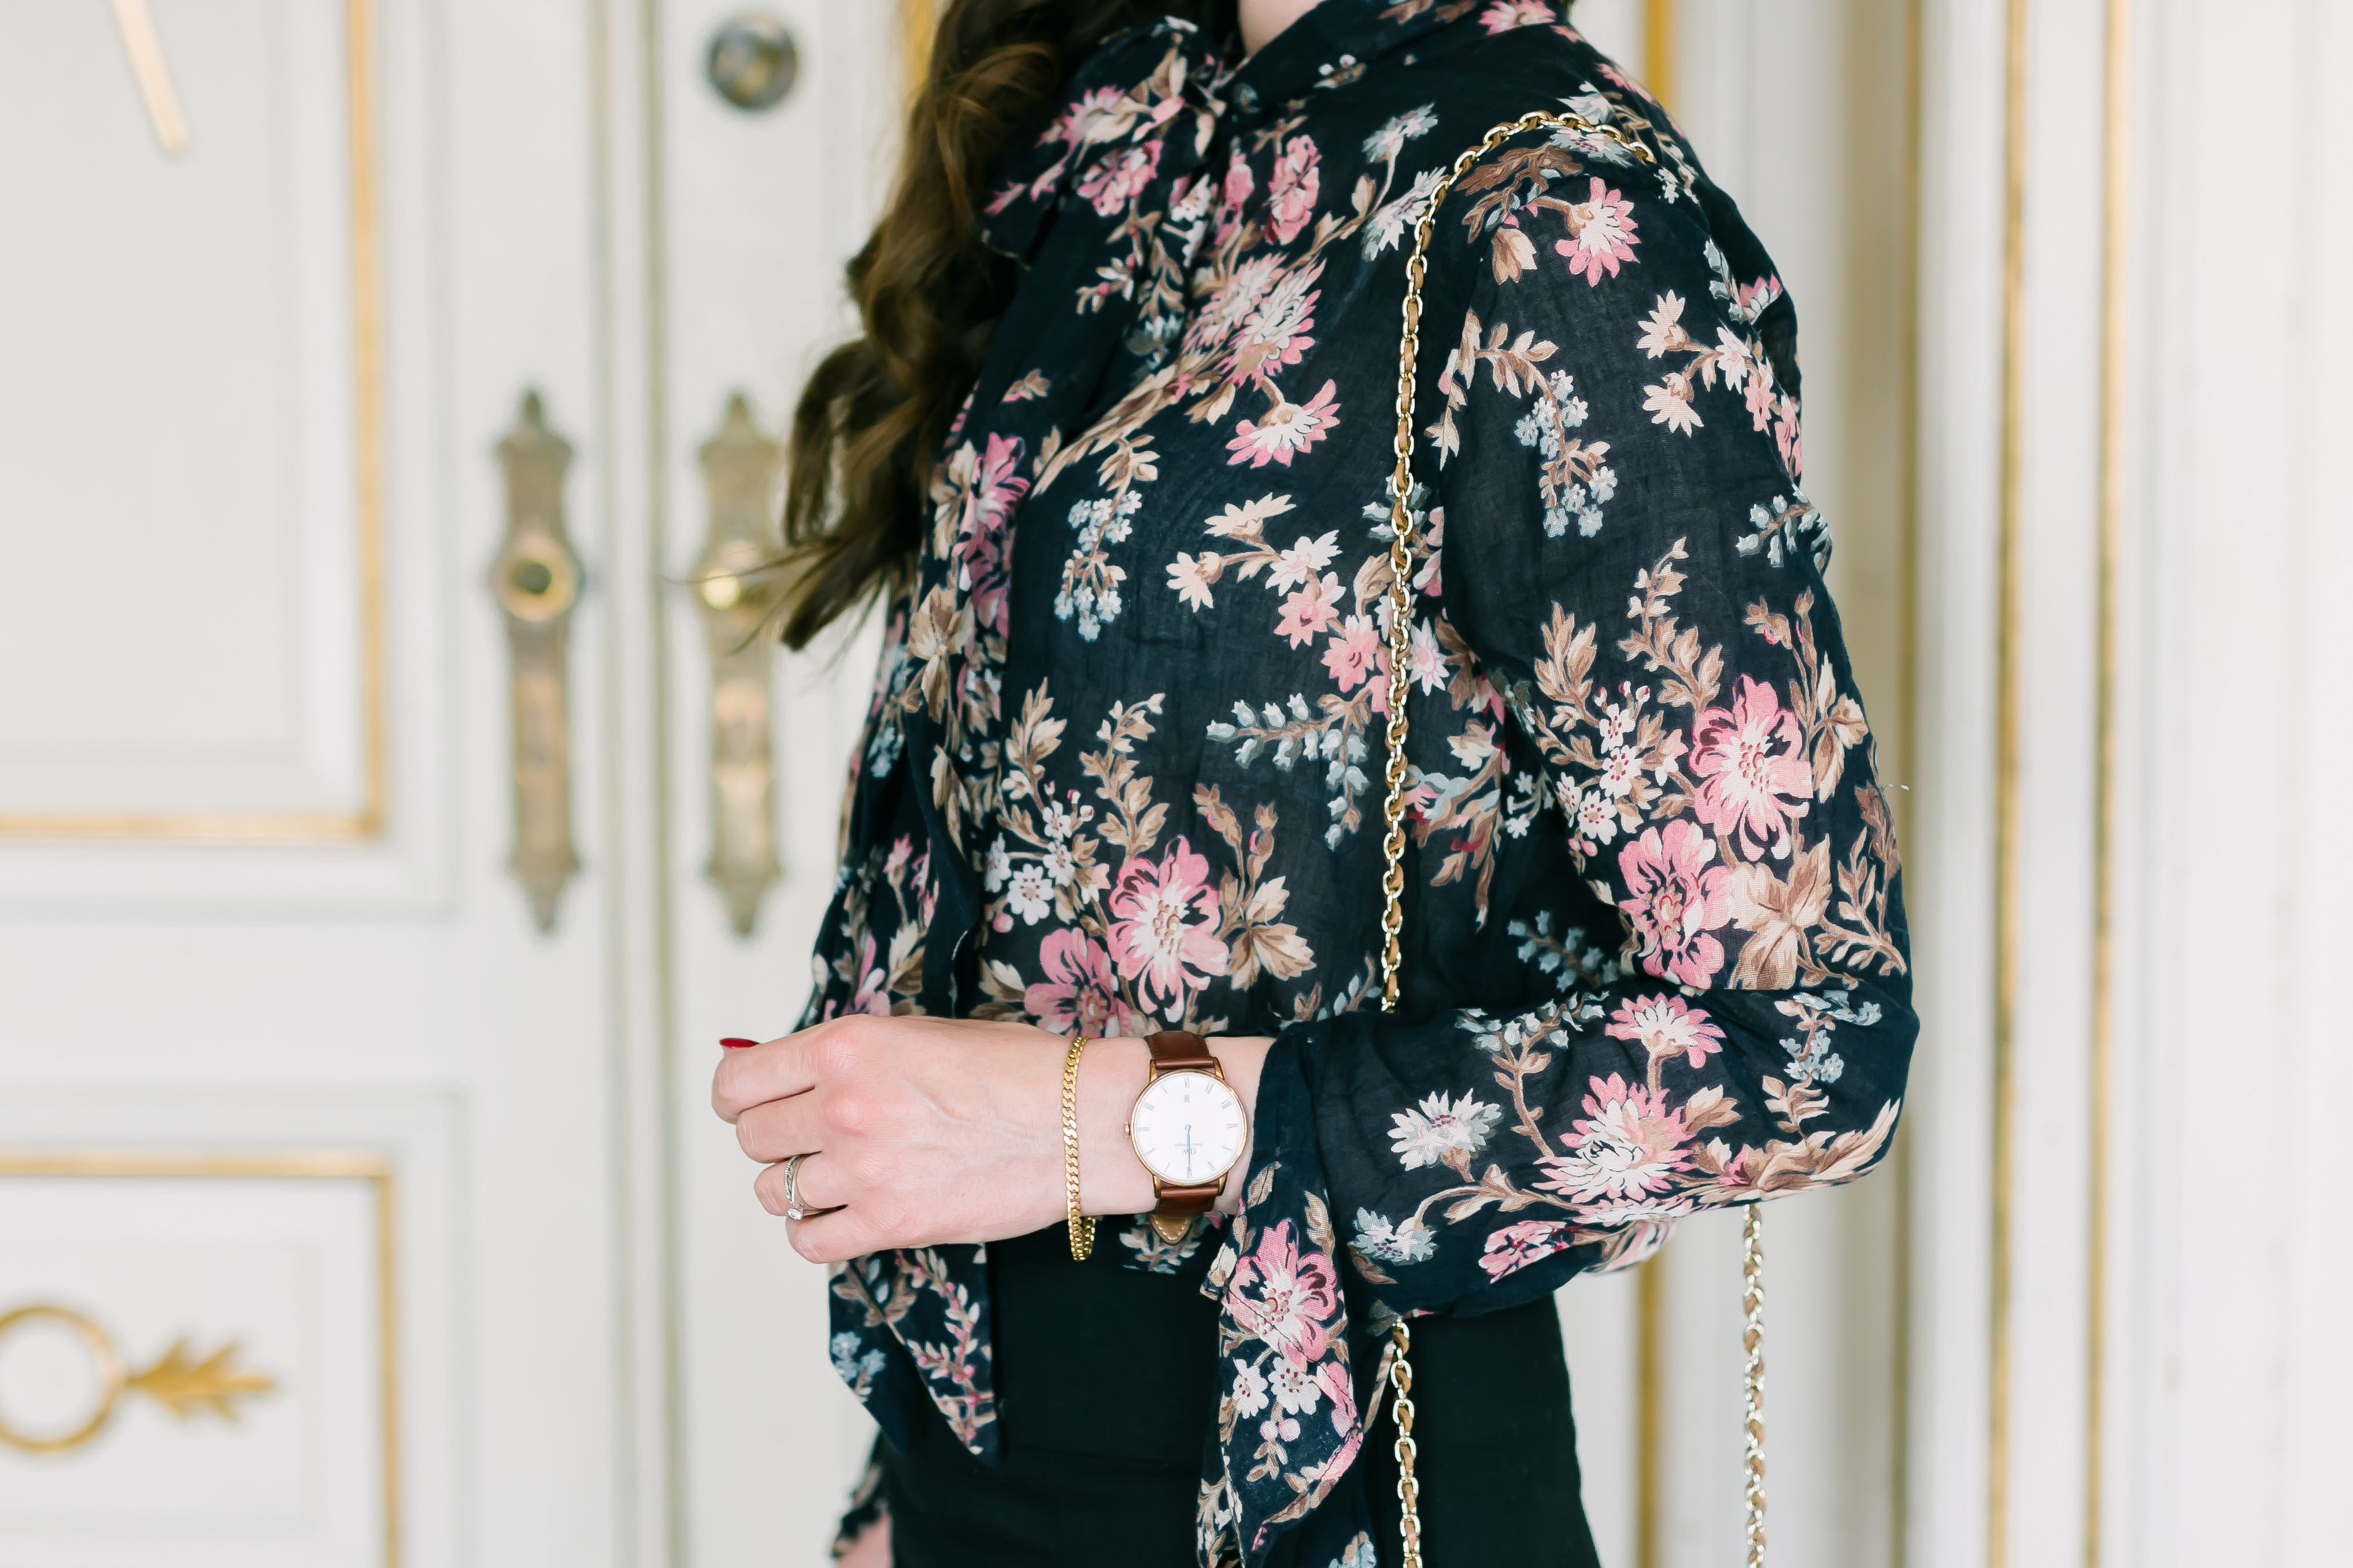 How to wear a Floral Print Blouse at the office